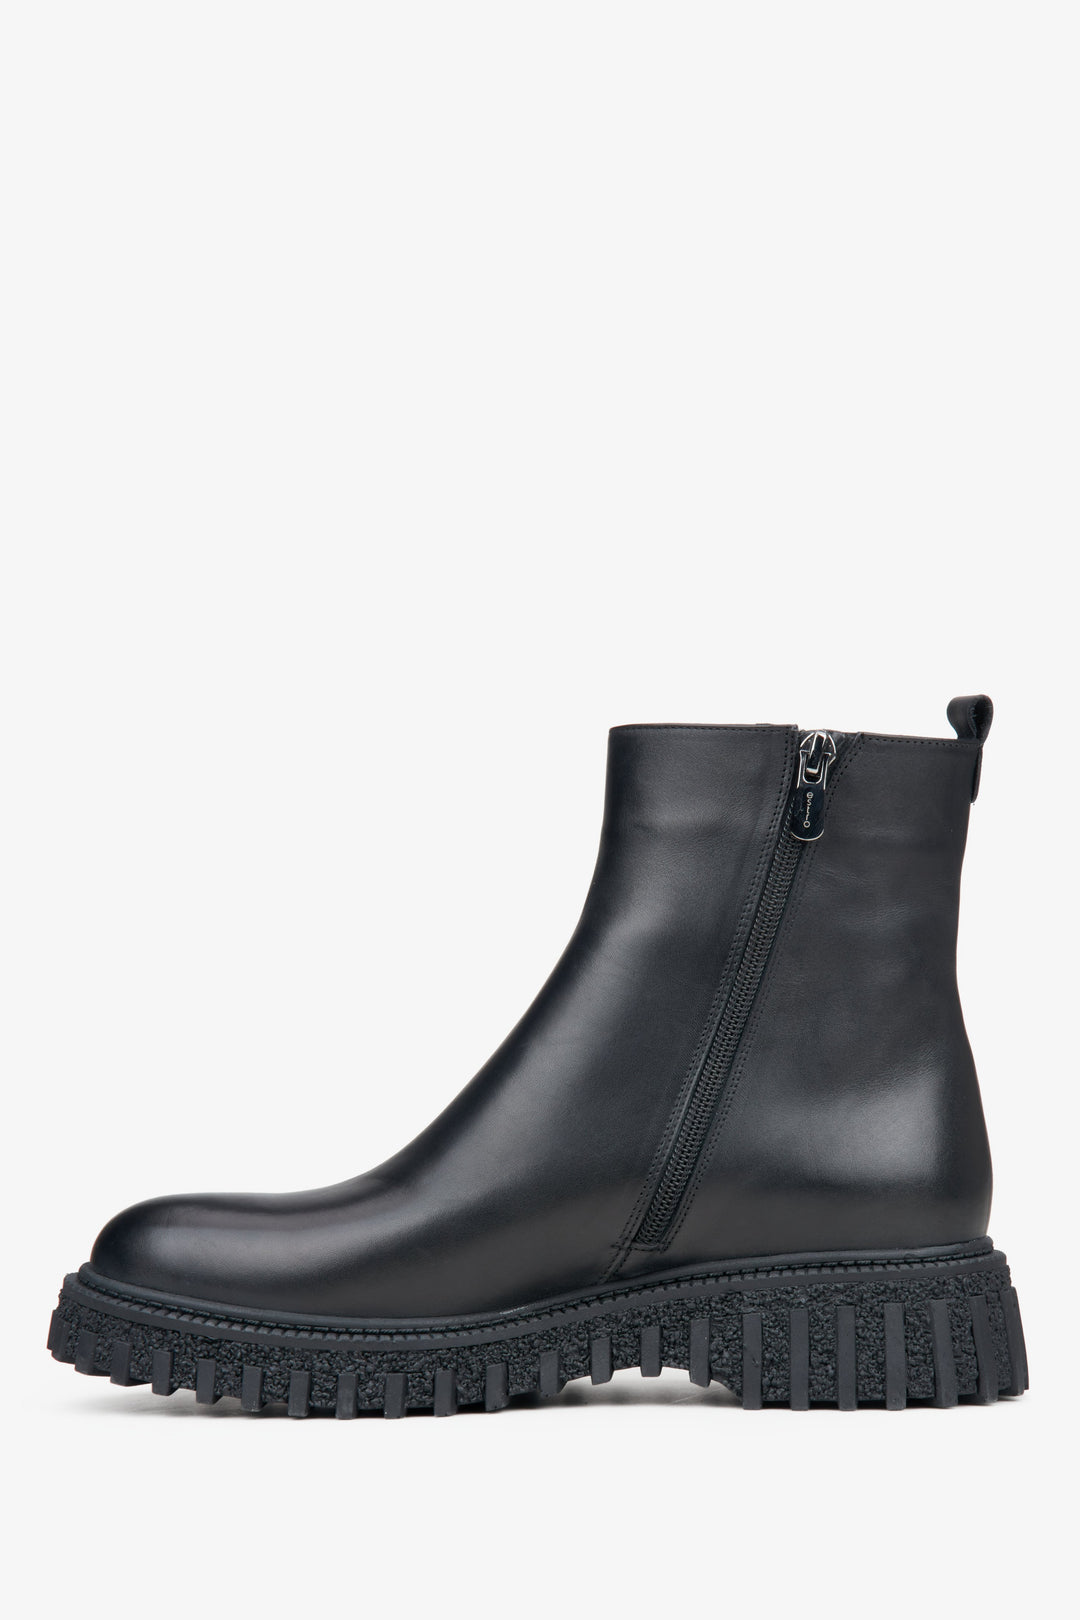 Women's black leather ankle boots.